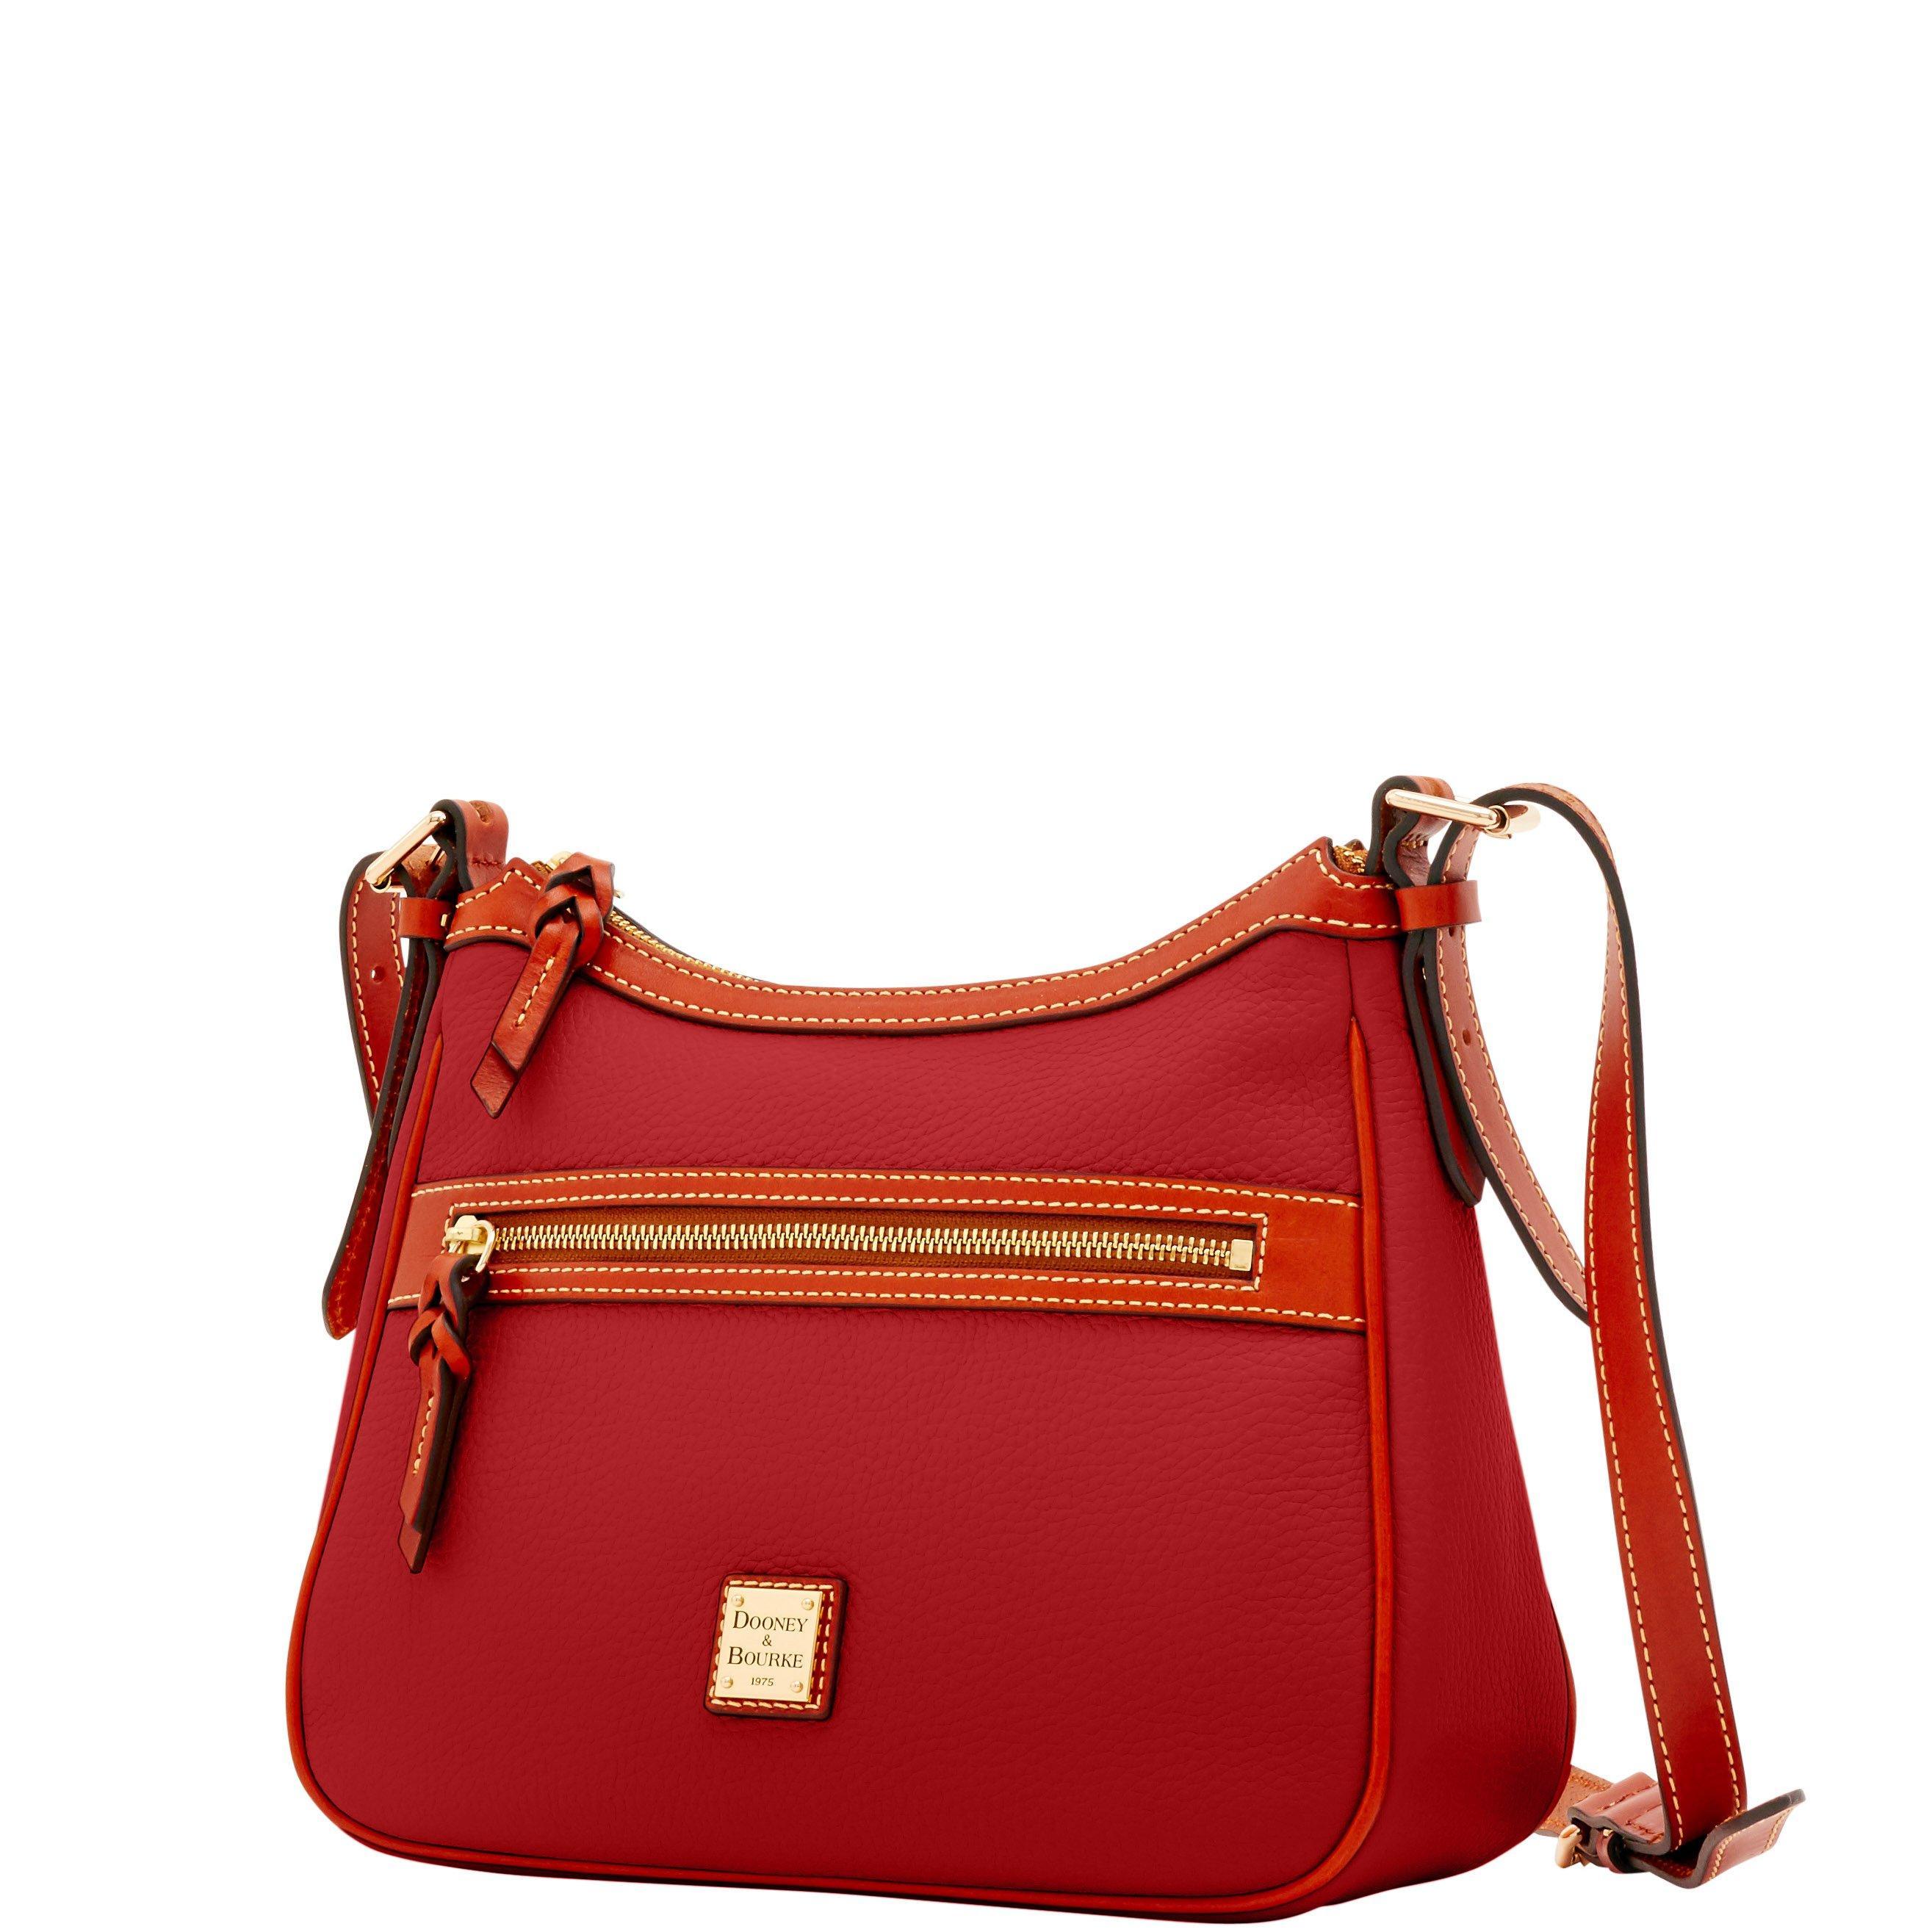 Dooney & Bourke Leather Pebble Grain Piper in Red - Save 36% - Lyst